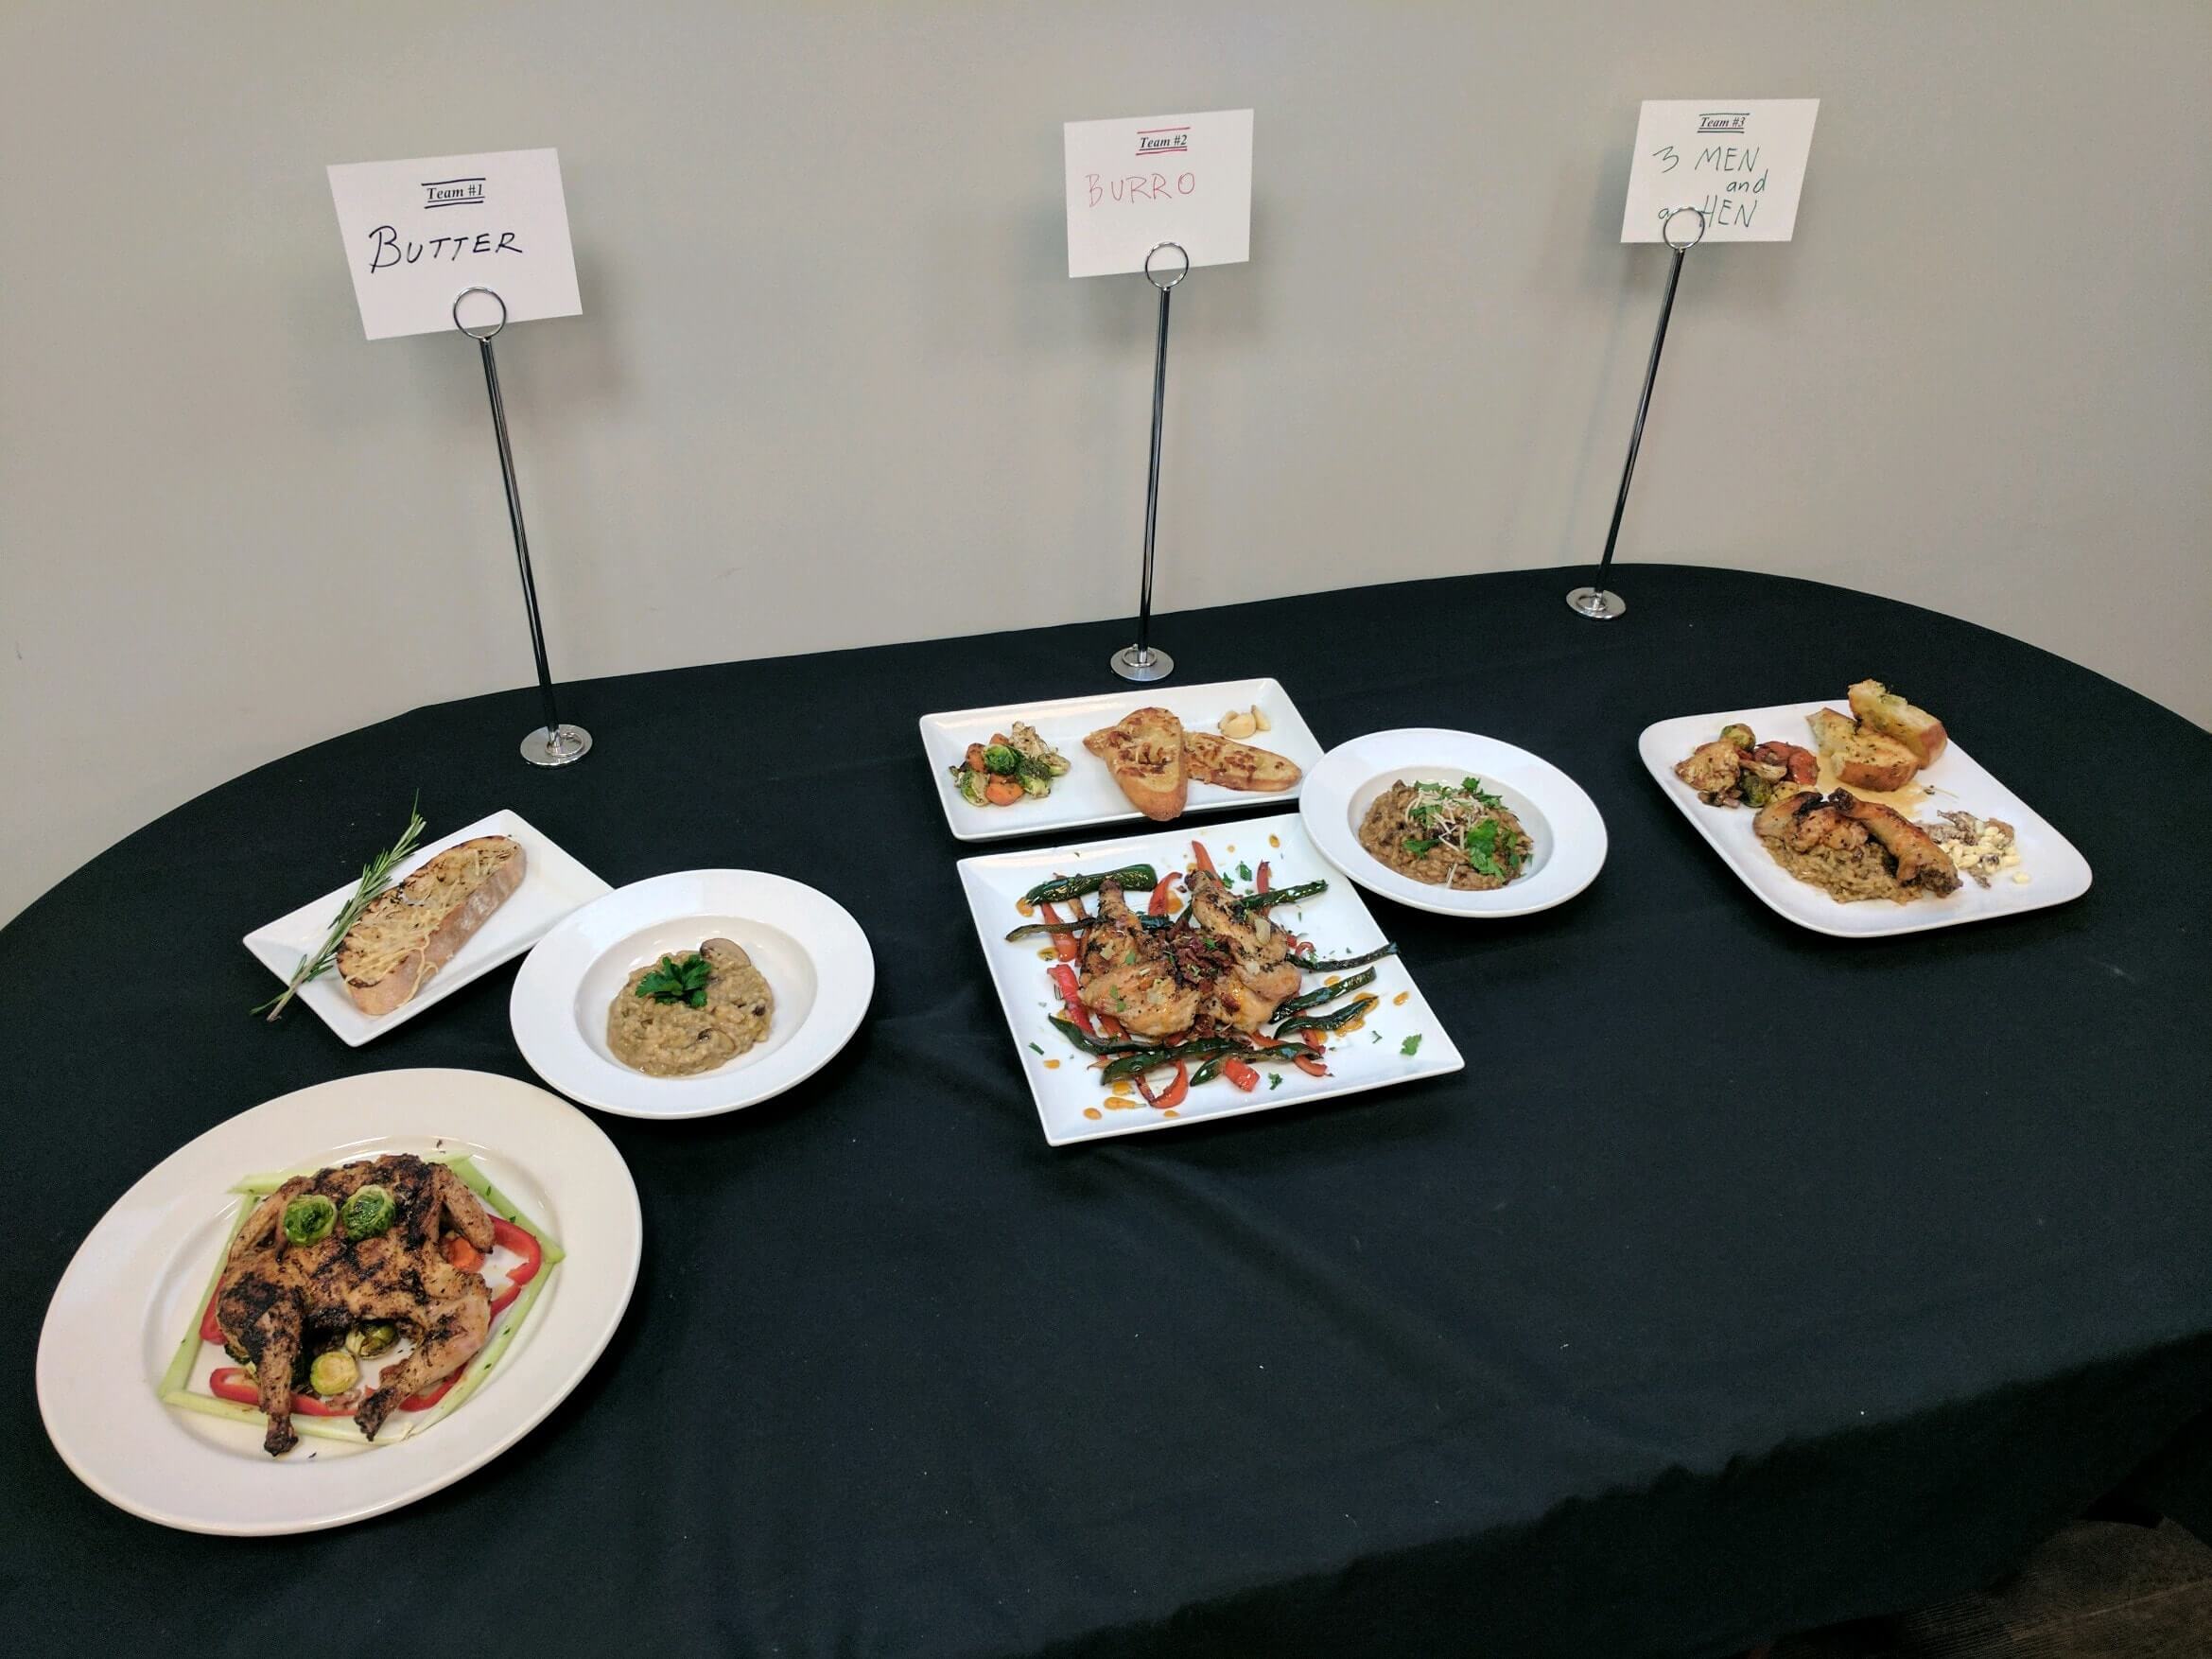 Final dishes awaiting the judges during our culinary team building event.